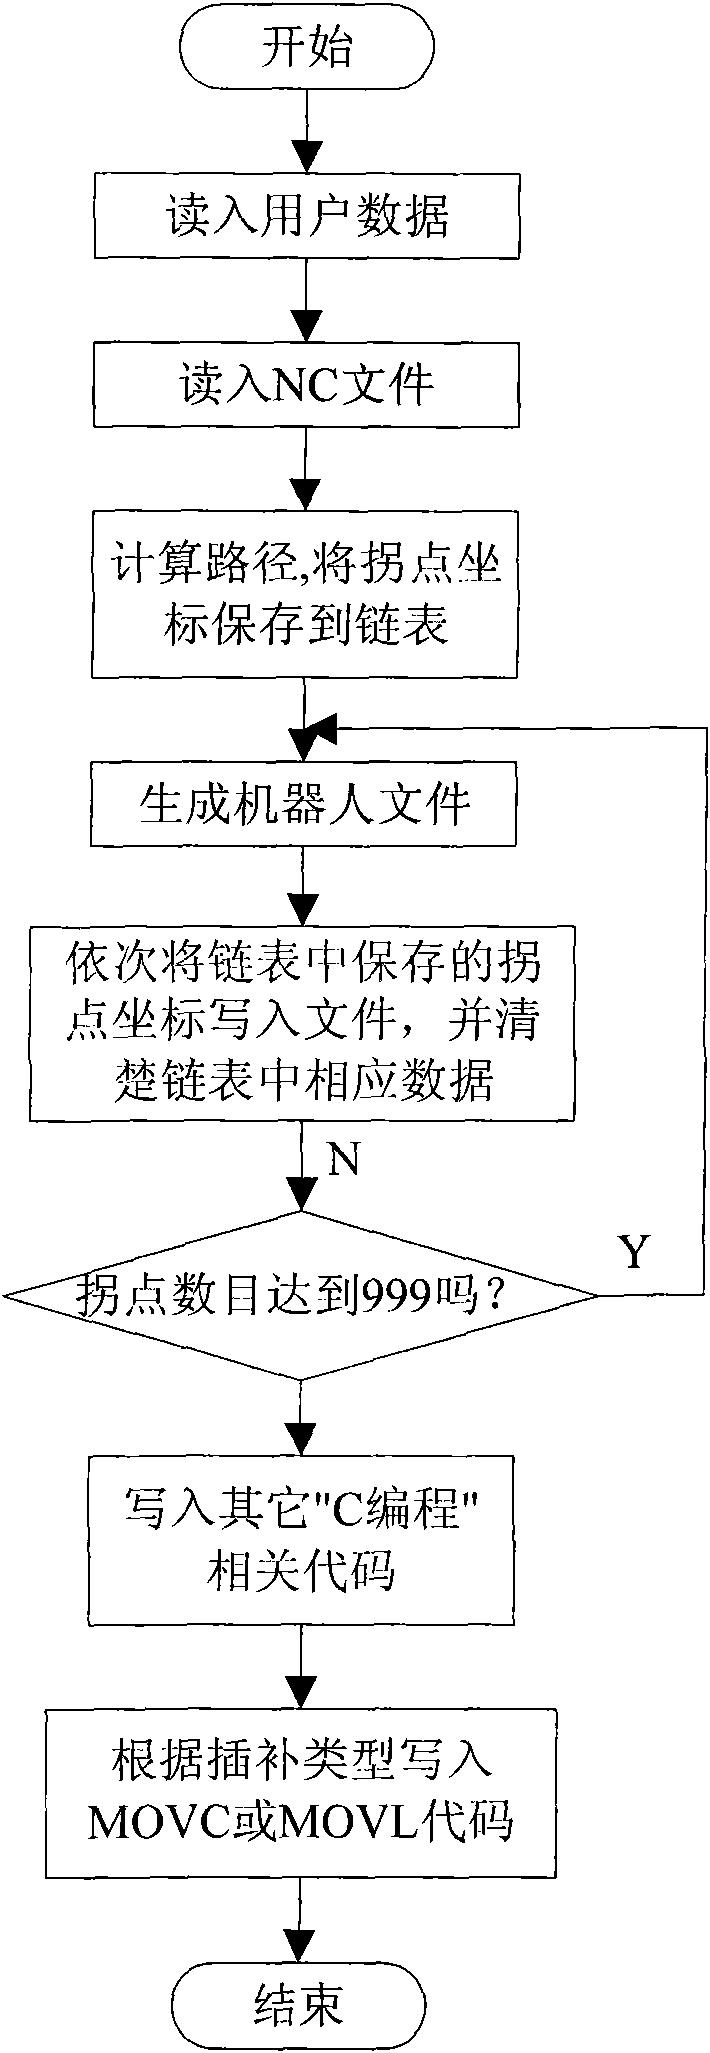 Processing control method of industrial robot based on G code conversion method